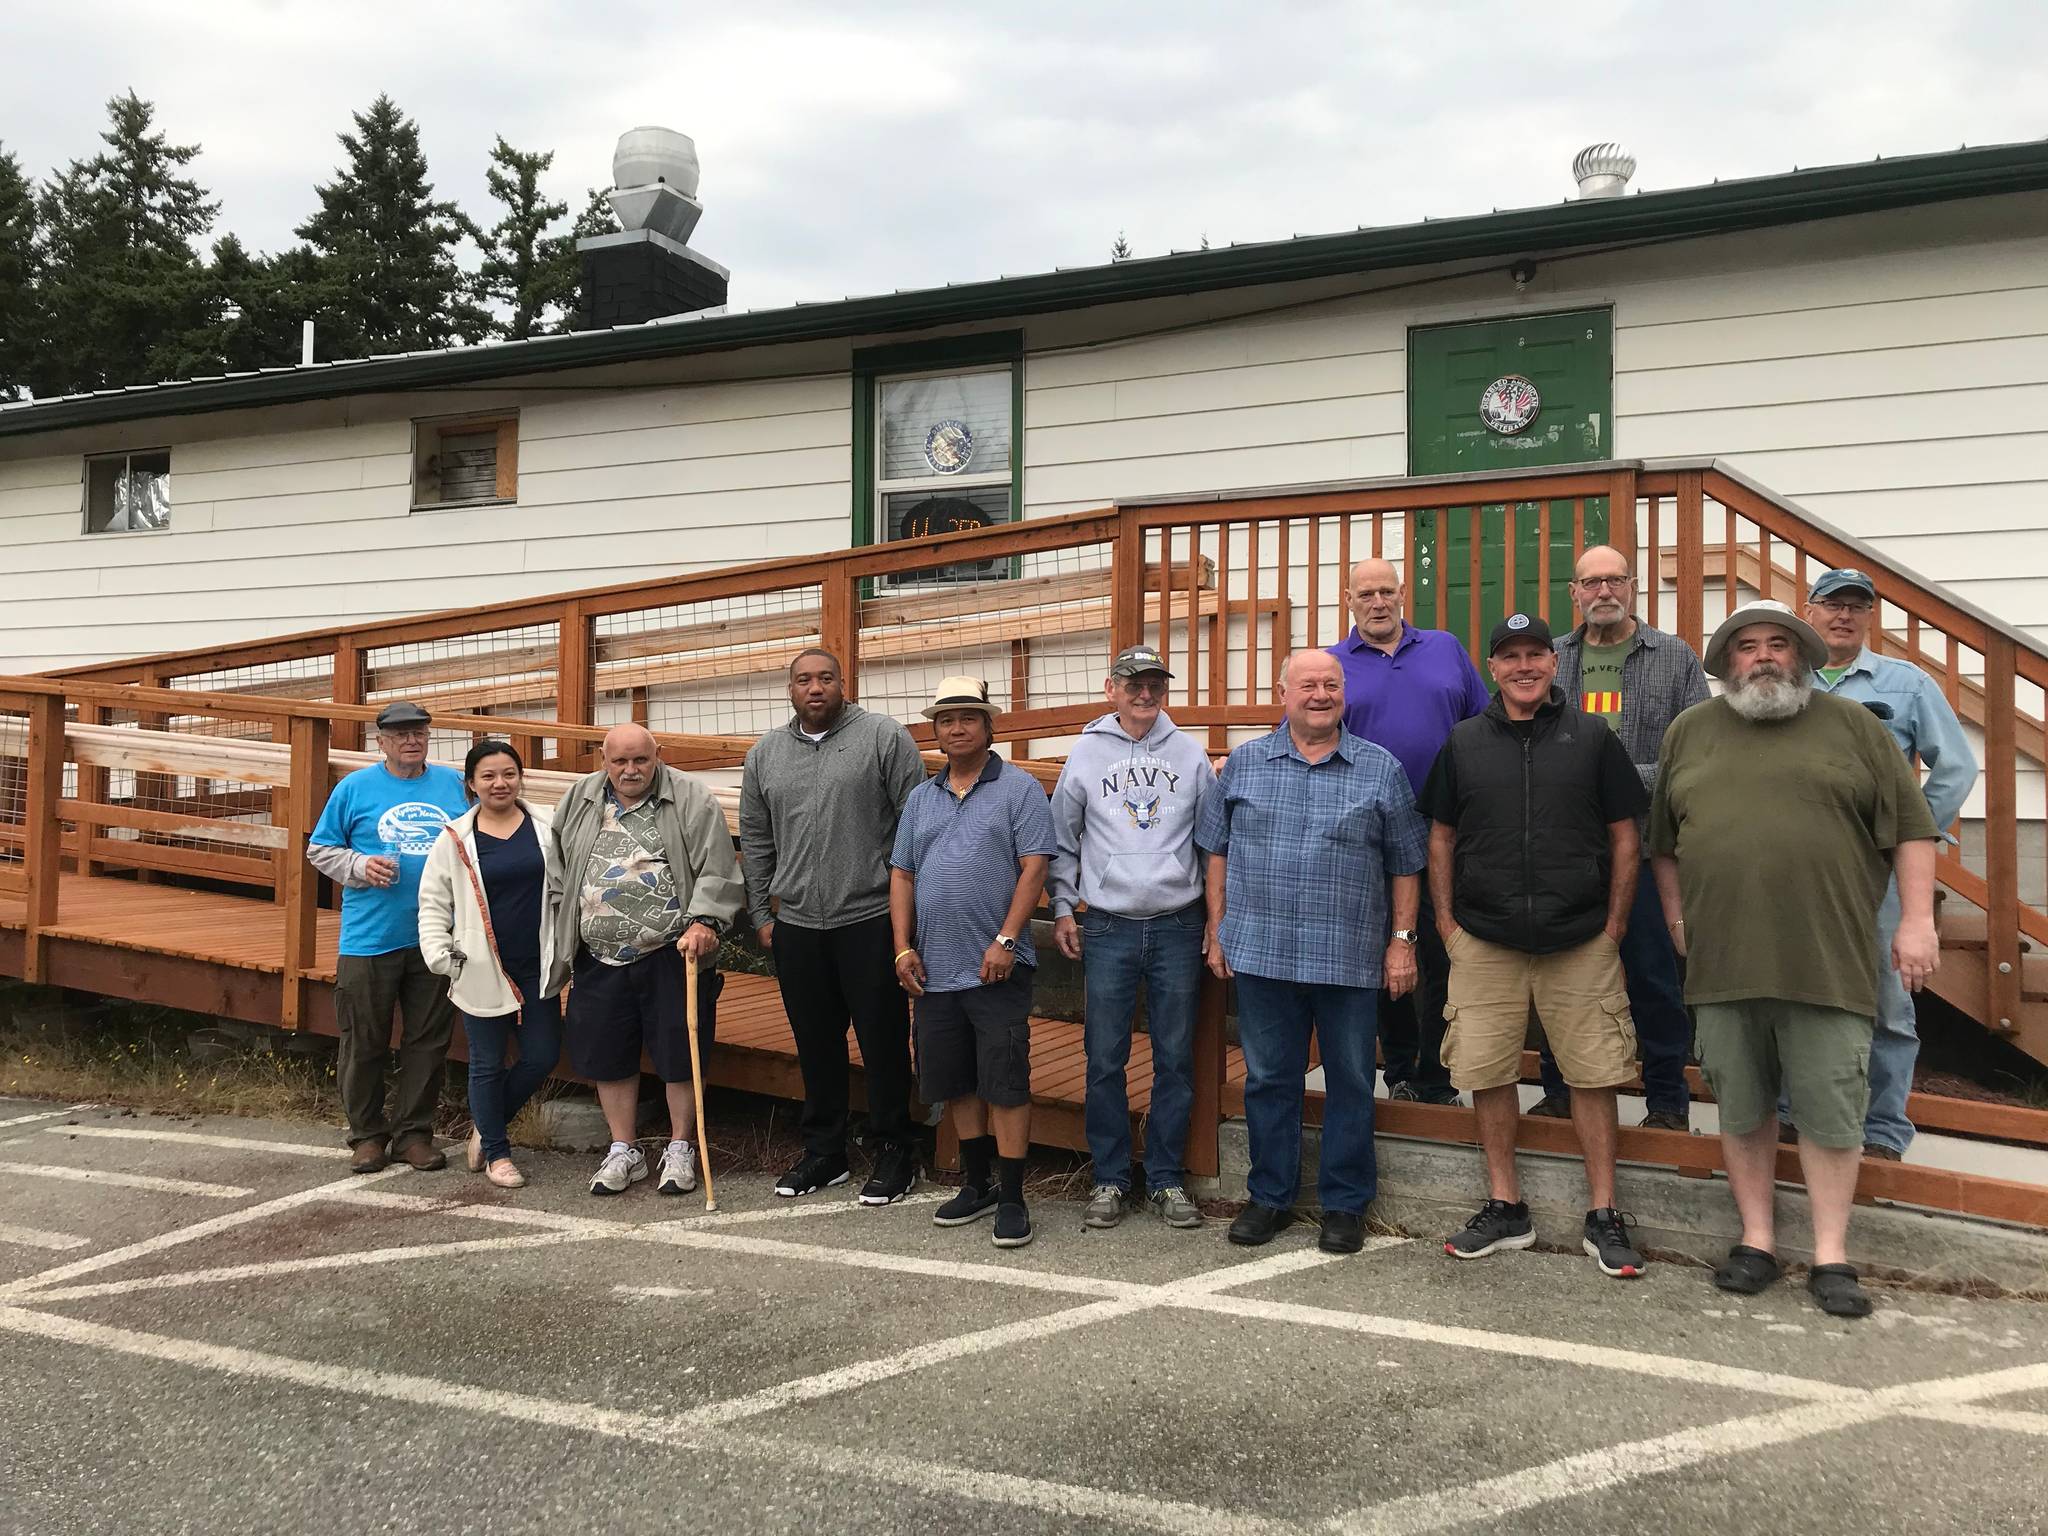 Disabled American Veterans built a ramp to make its Oak Harbor location more wheelchair-accessible. Construction was completed this summer. (Photo provided by John Callahan)